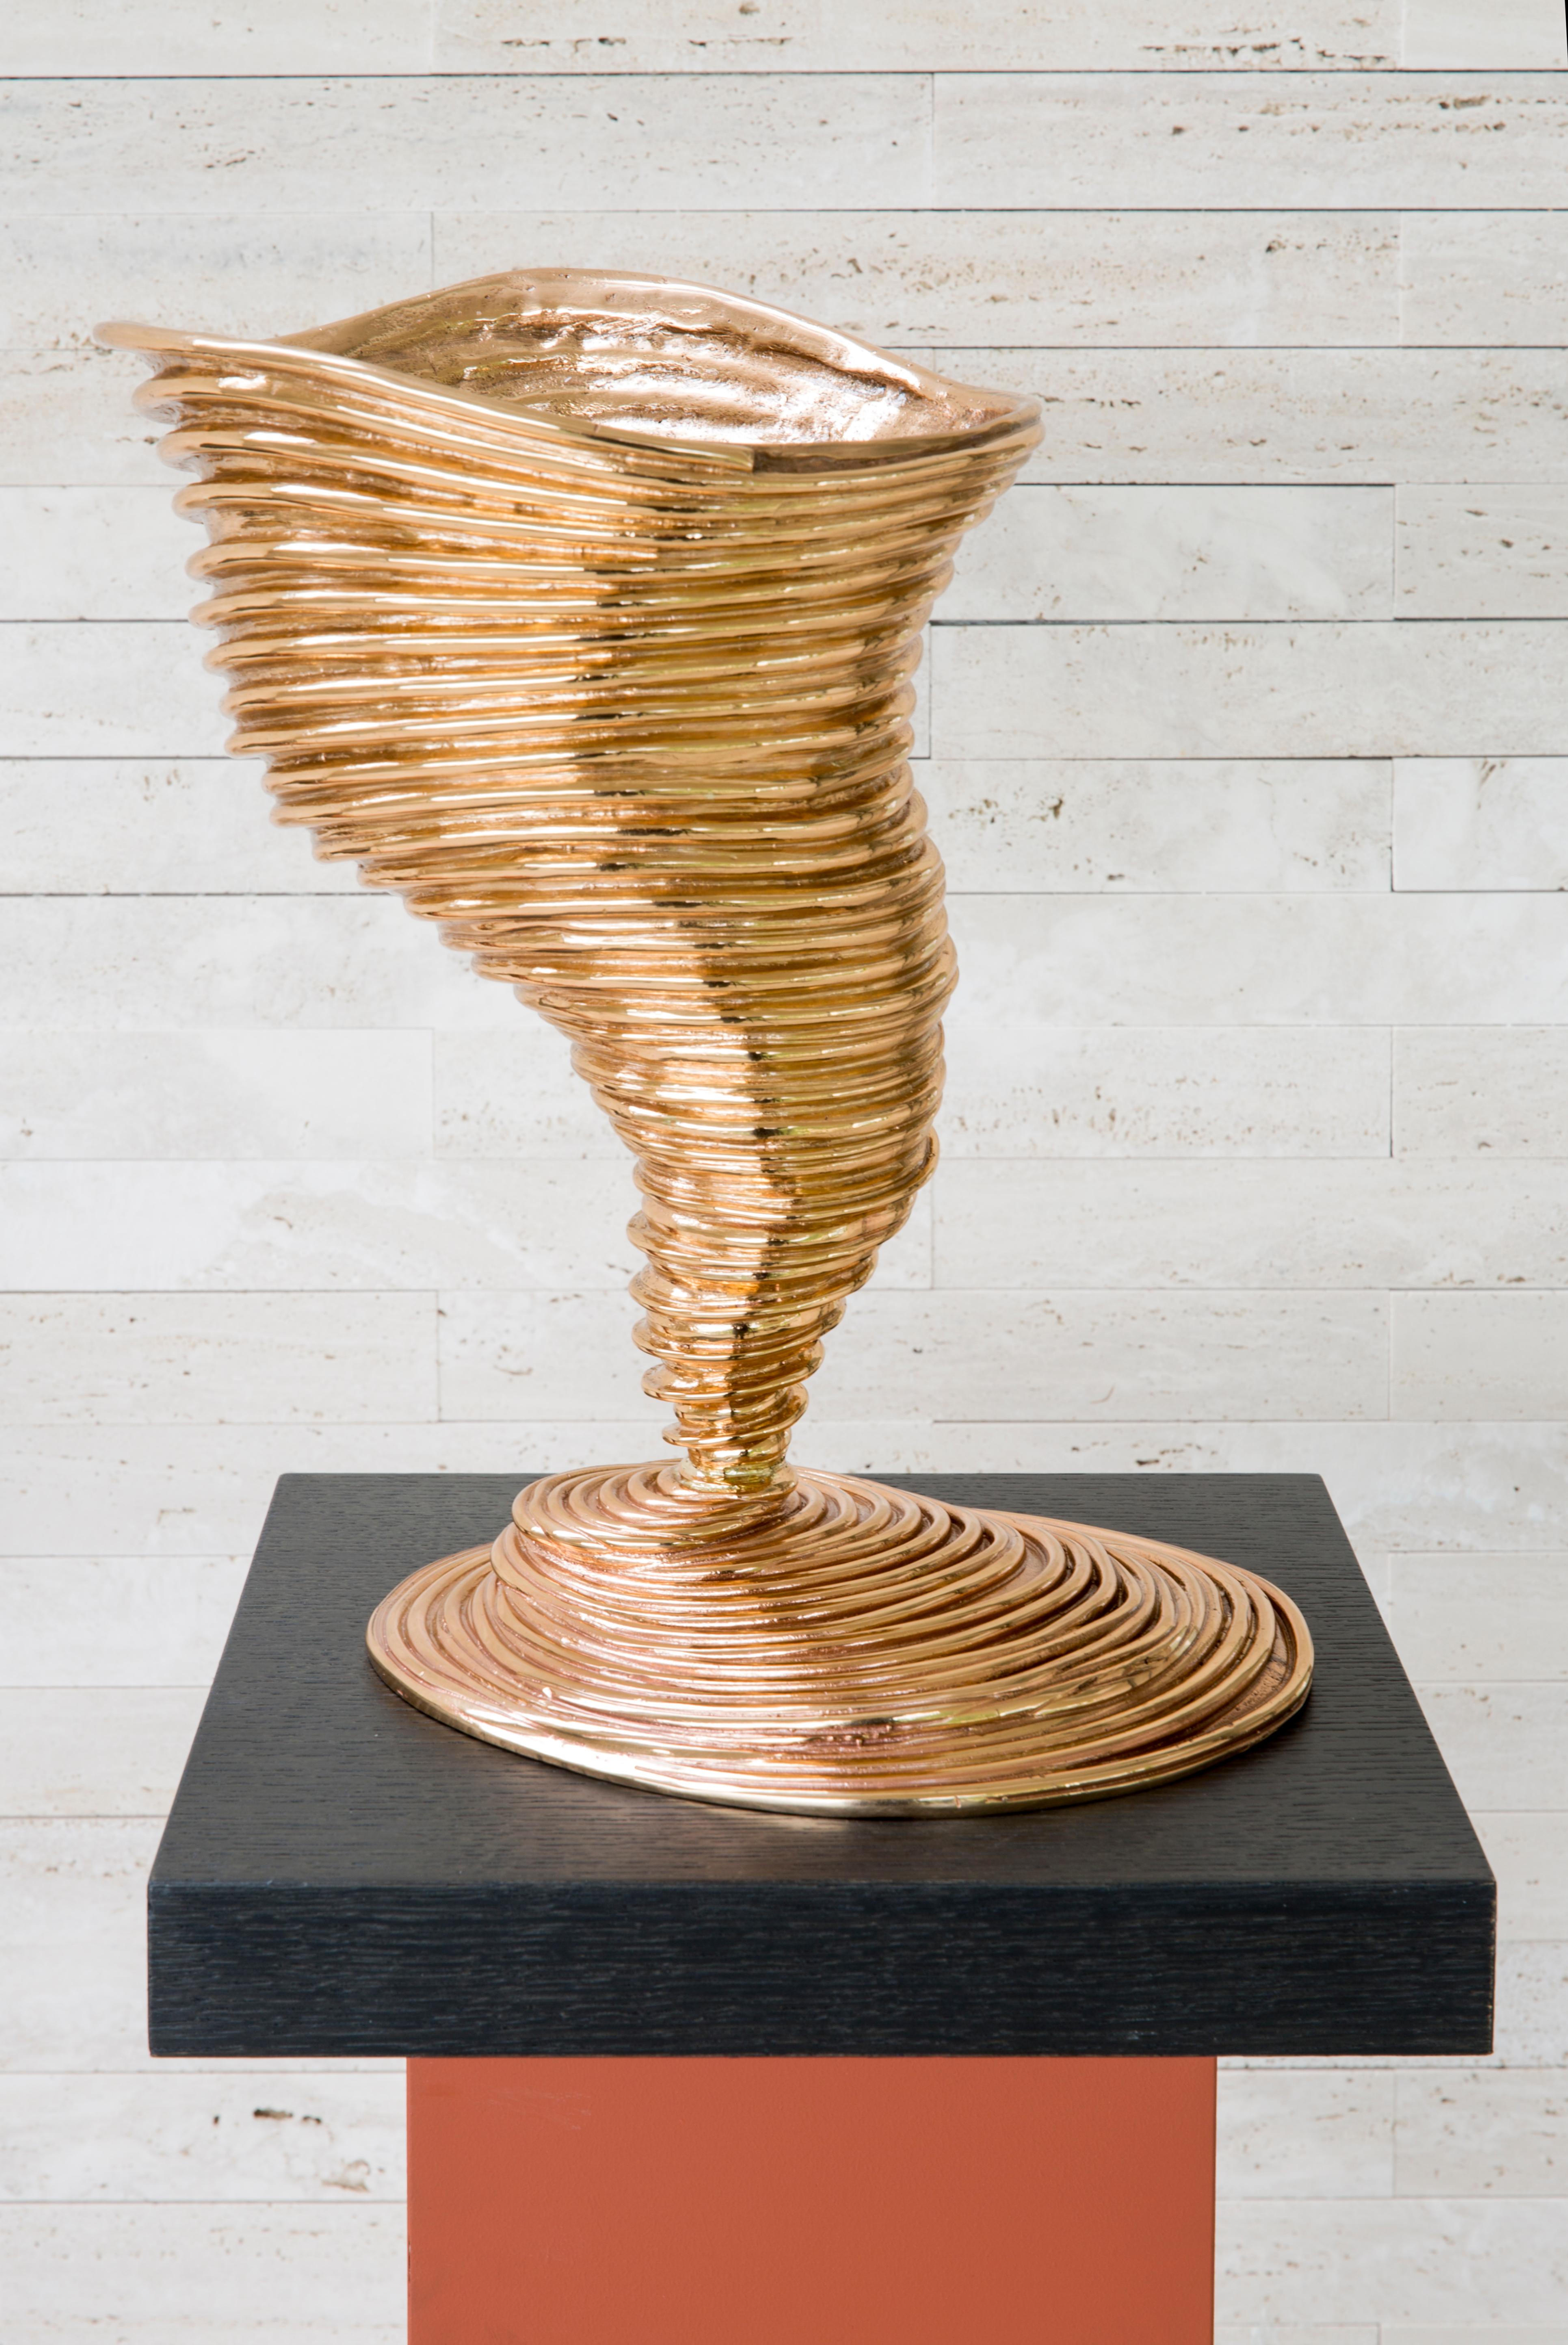 Contemporary Ghidini 1961 Tornado Sculptural Vase in Bronze by Campana Brothers For Sale